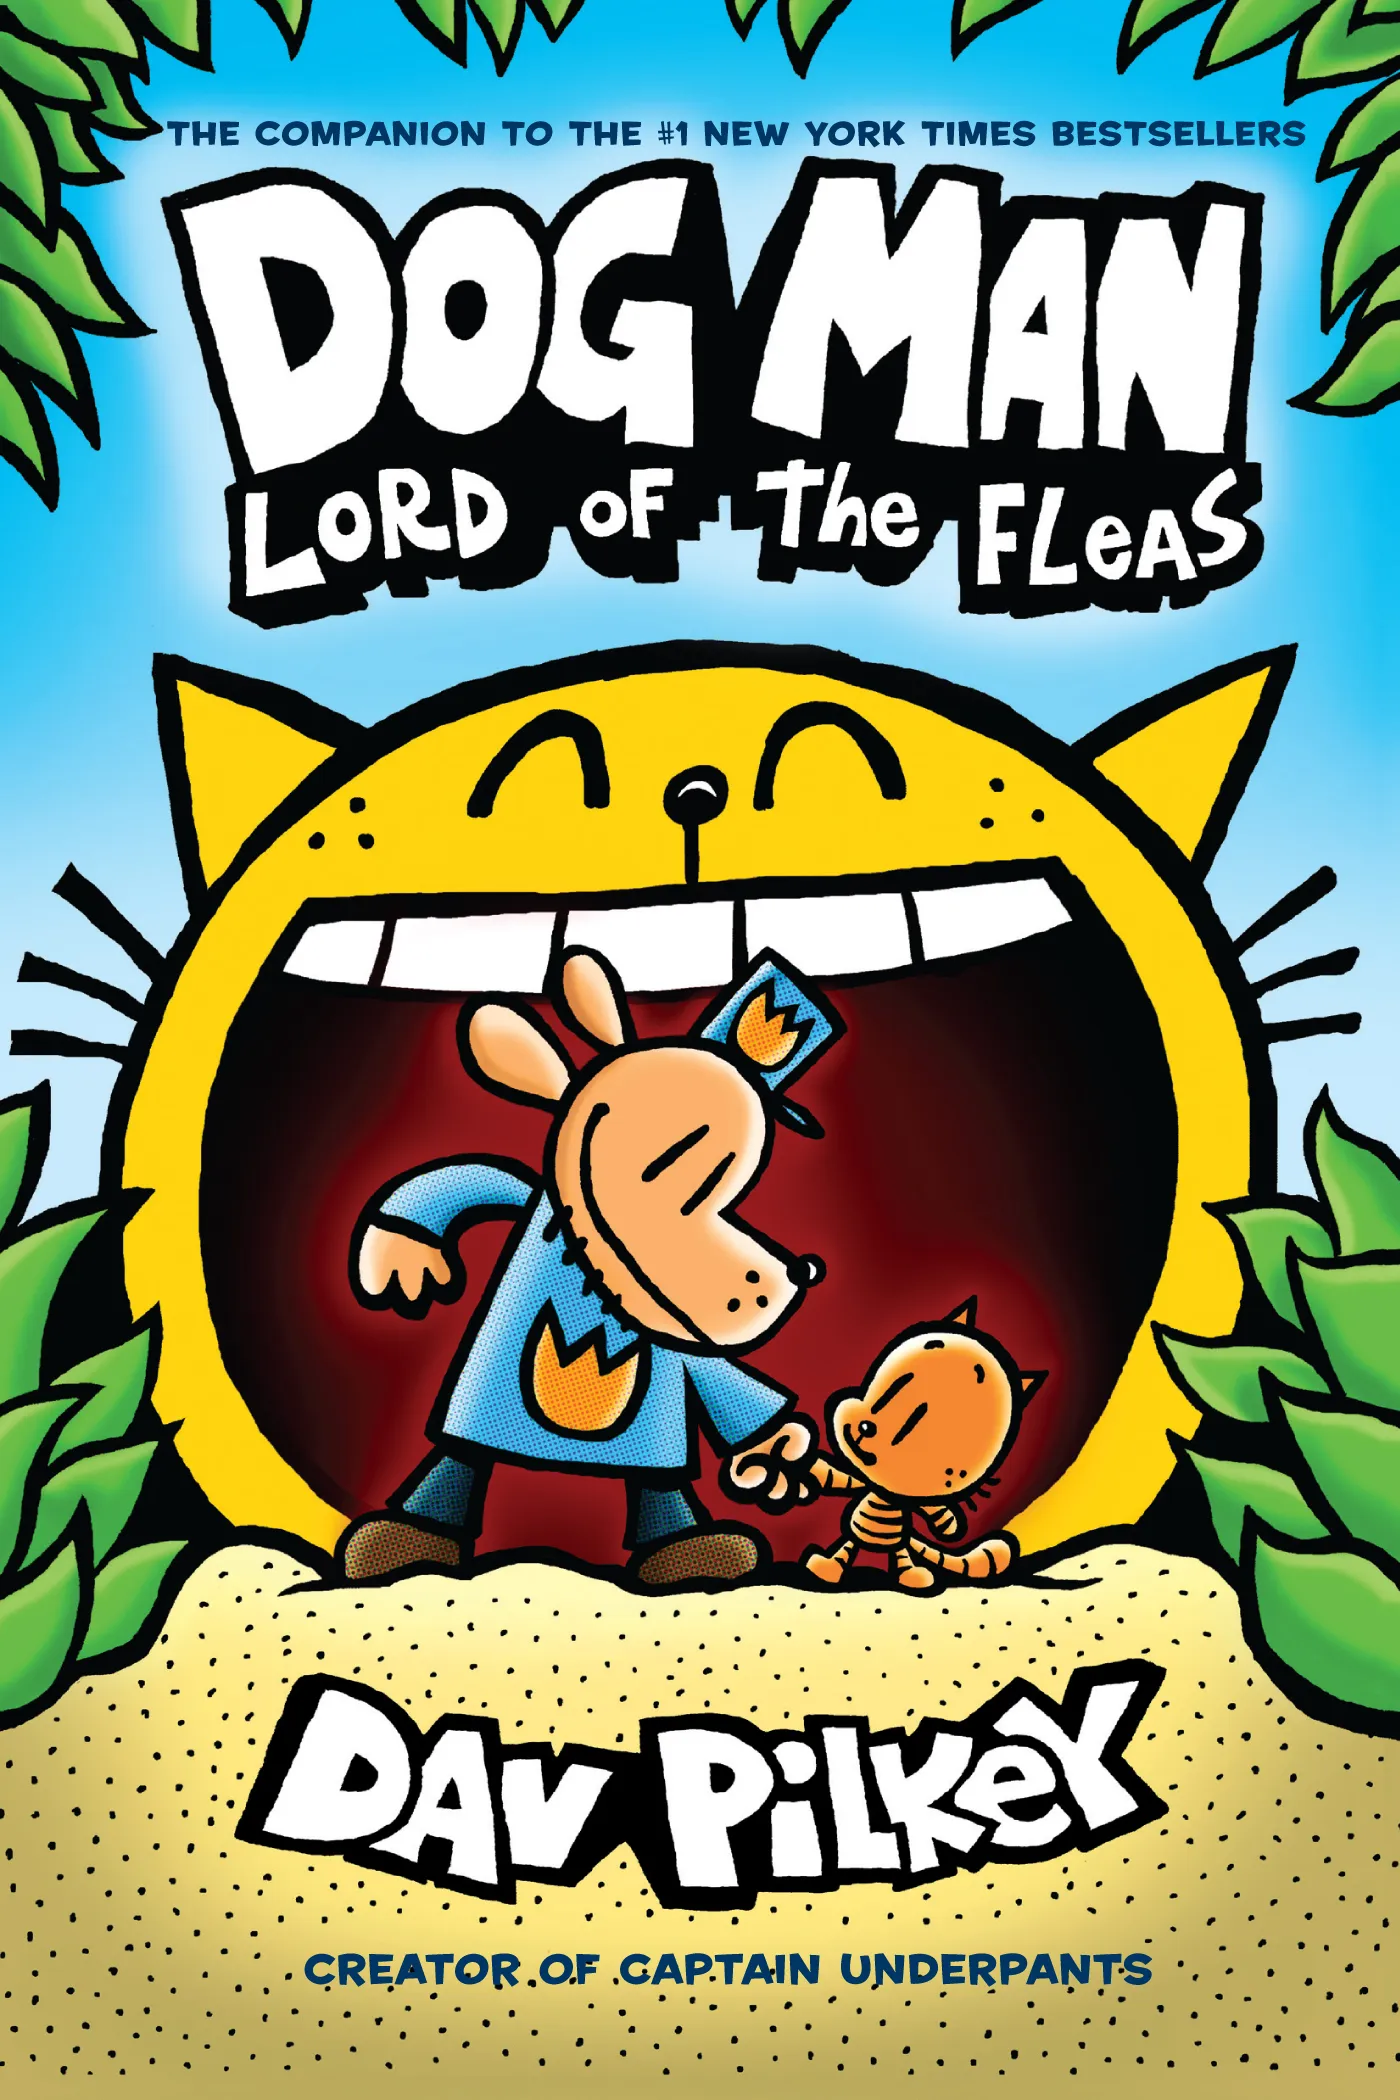 Lord of the Fleas: A Graphic Novel (Dog Man #5)